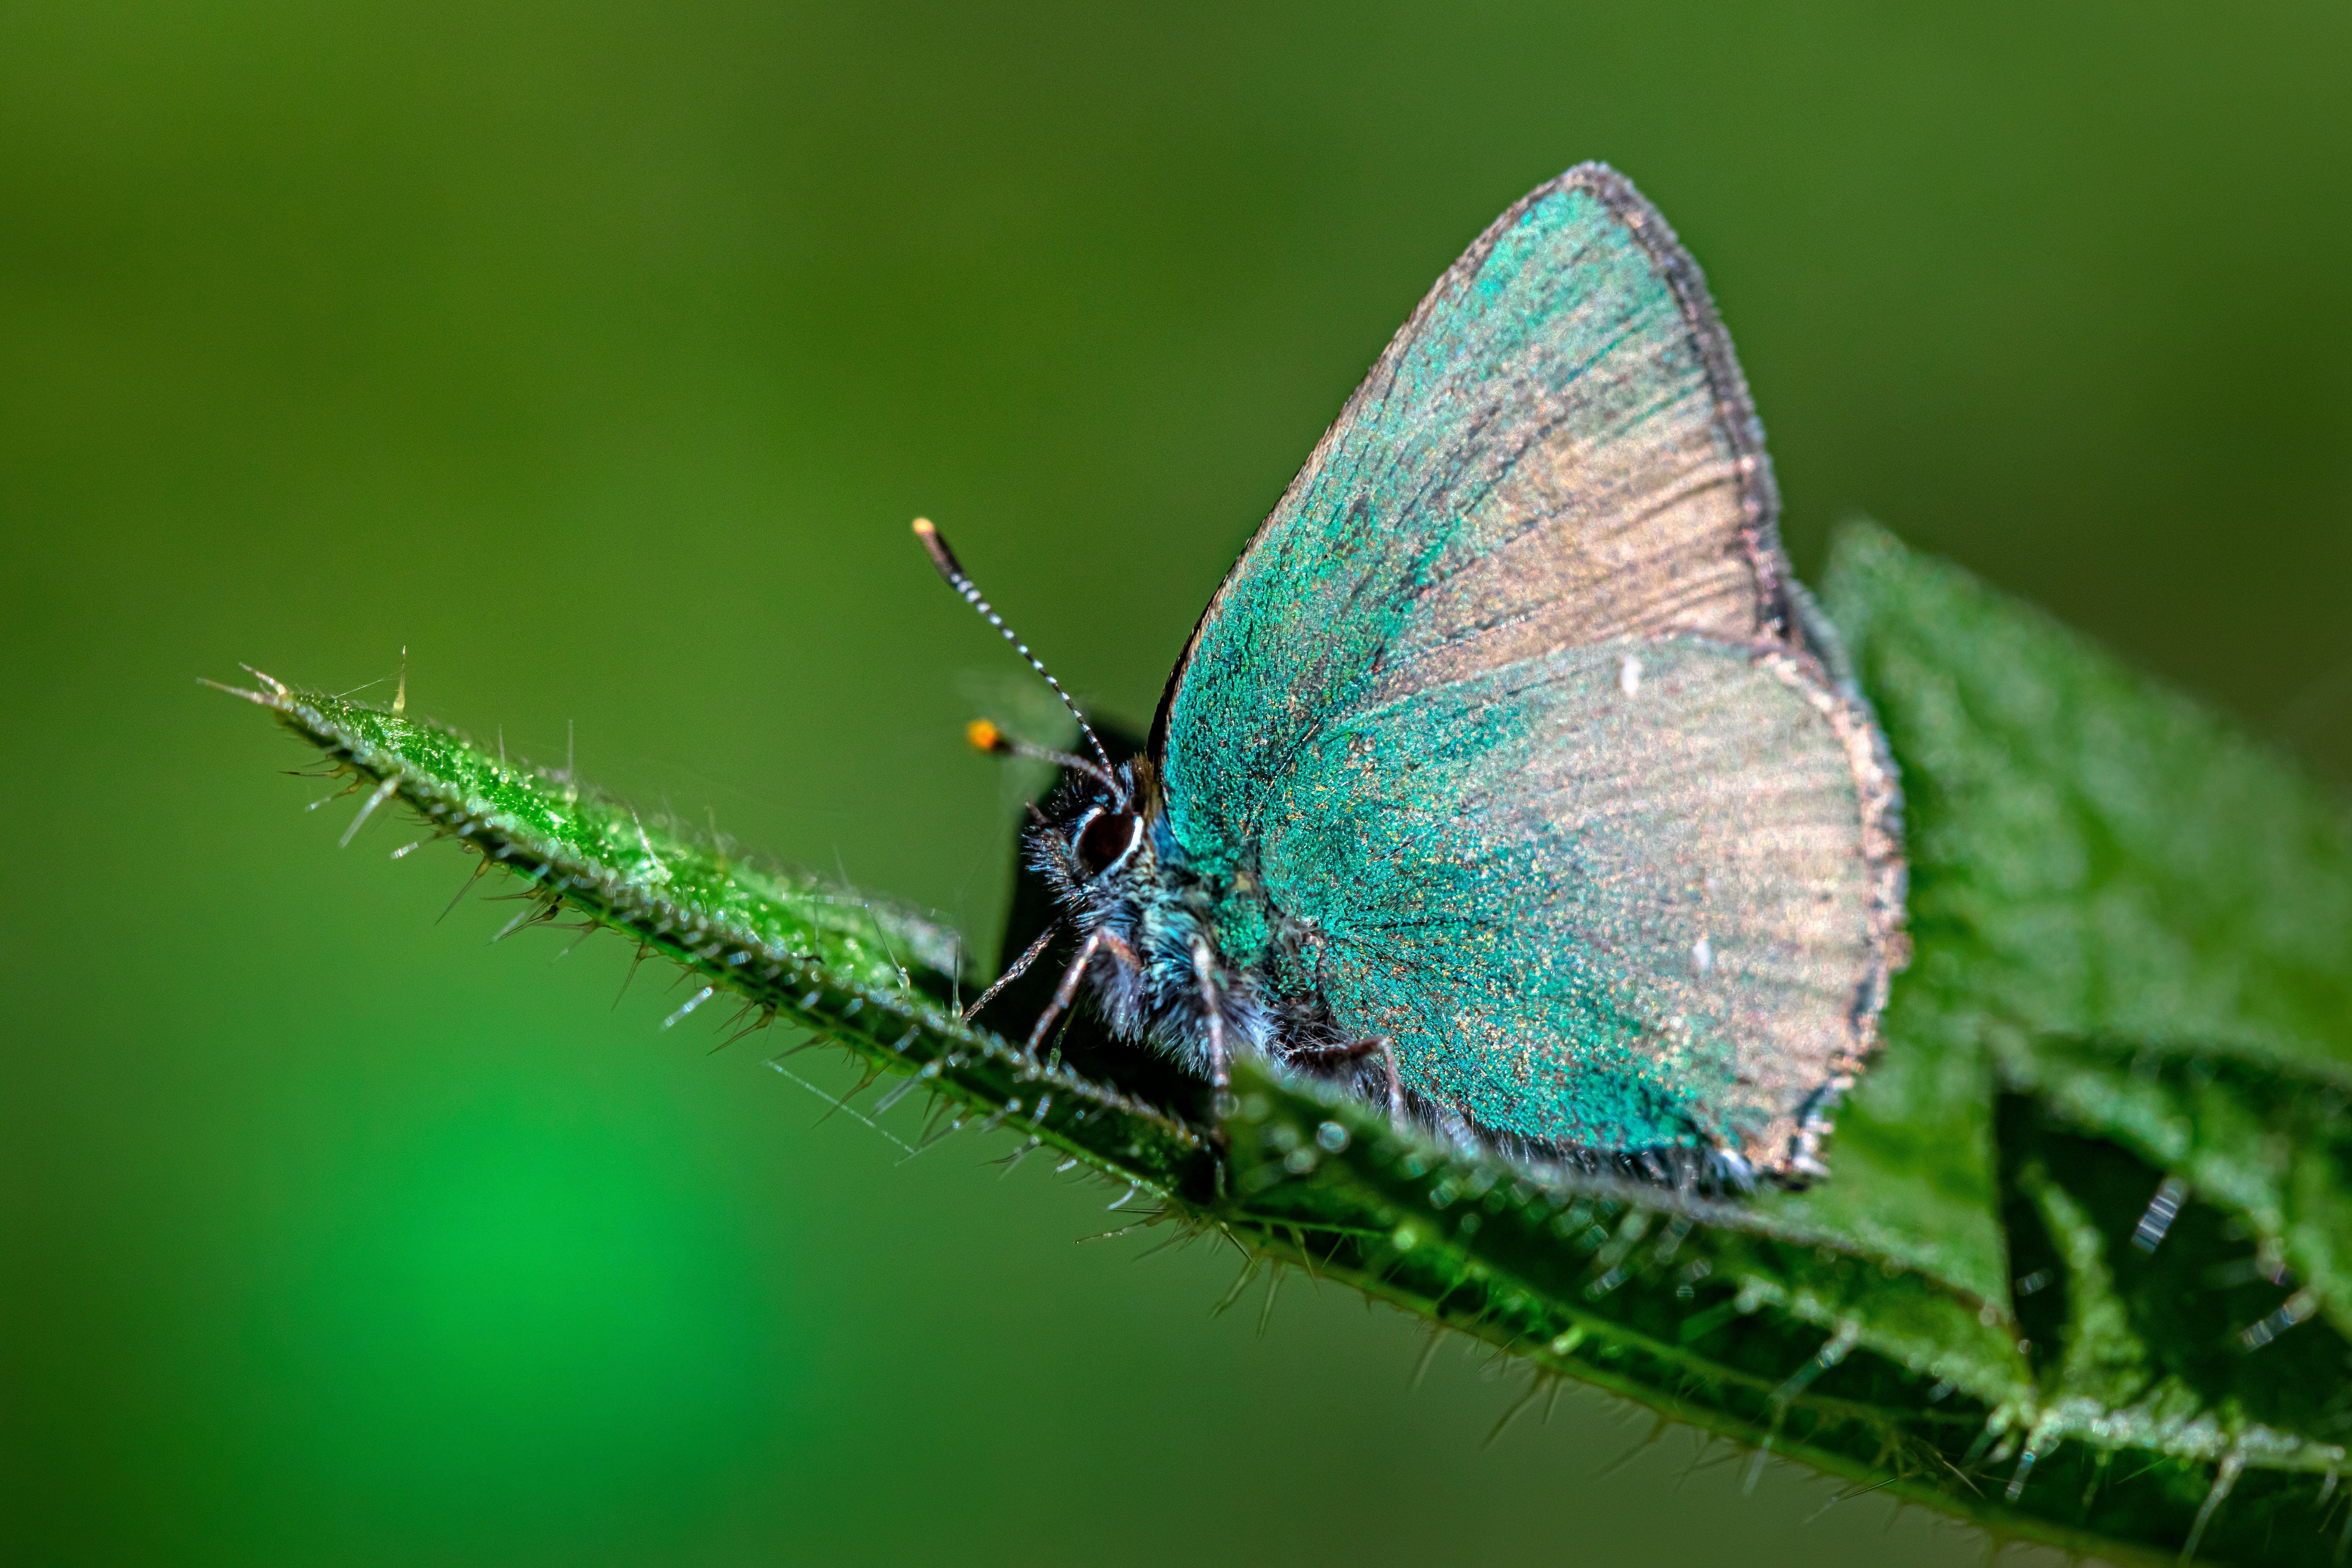 blue and white butterfly on green stem in macro photography during daytime